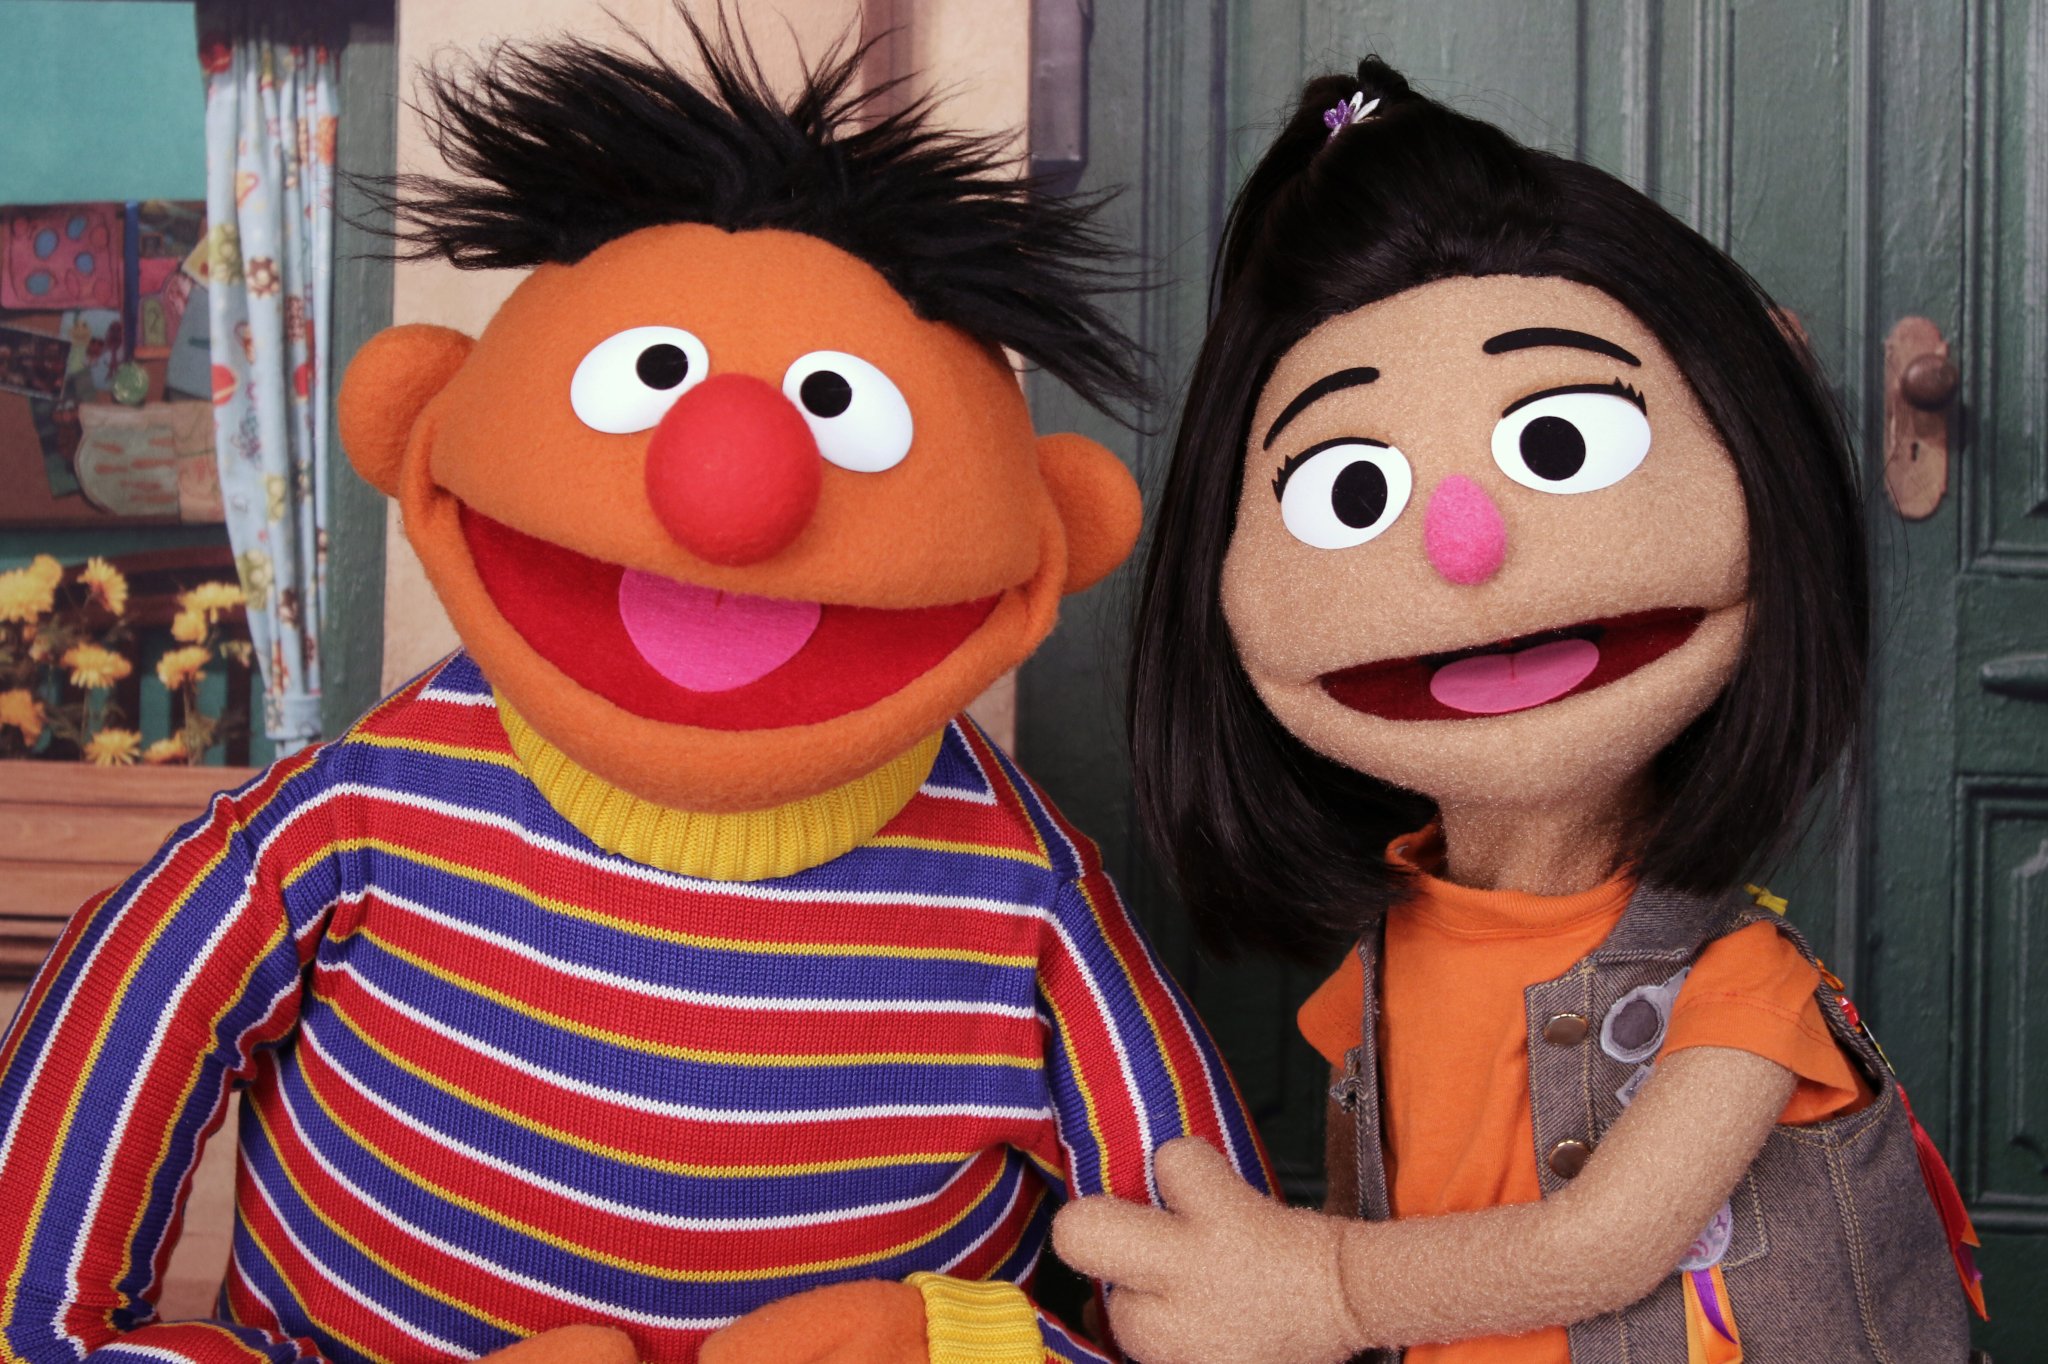 This 'Sesame Street' kid is now the Muppeteer for its first Asian American character